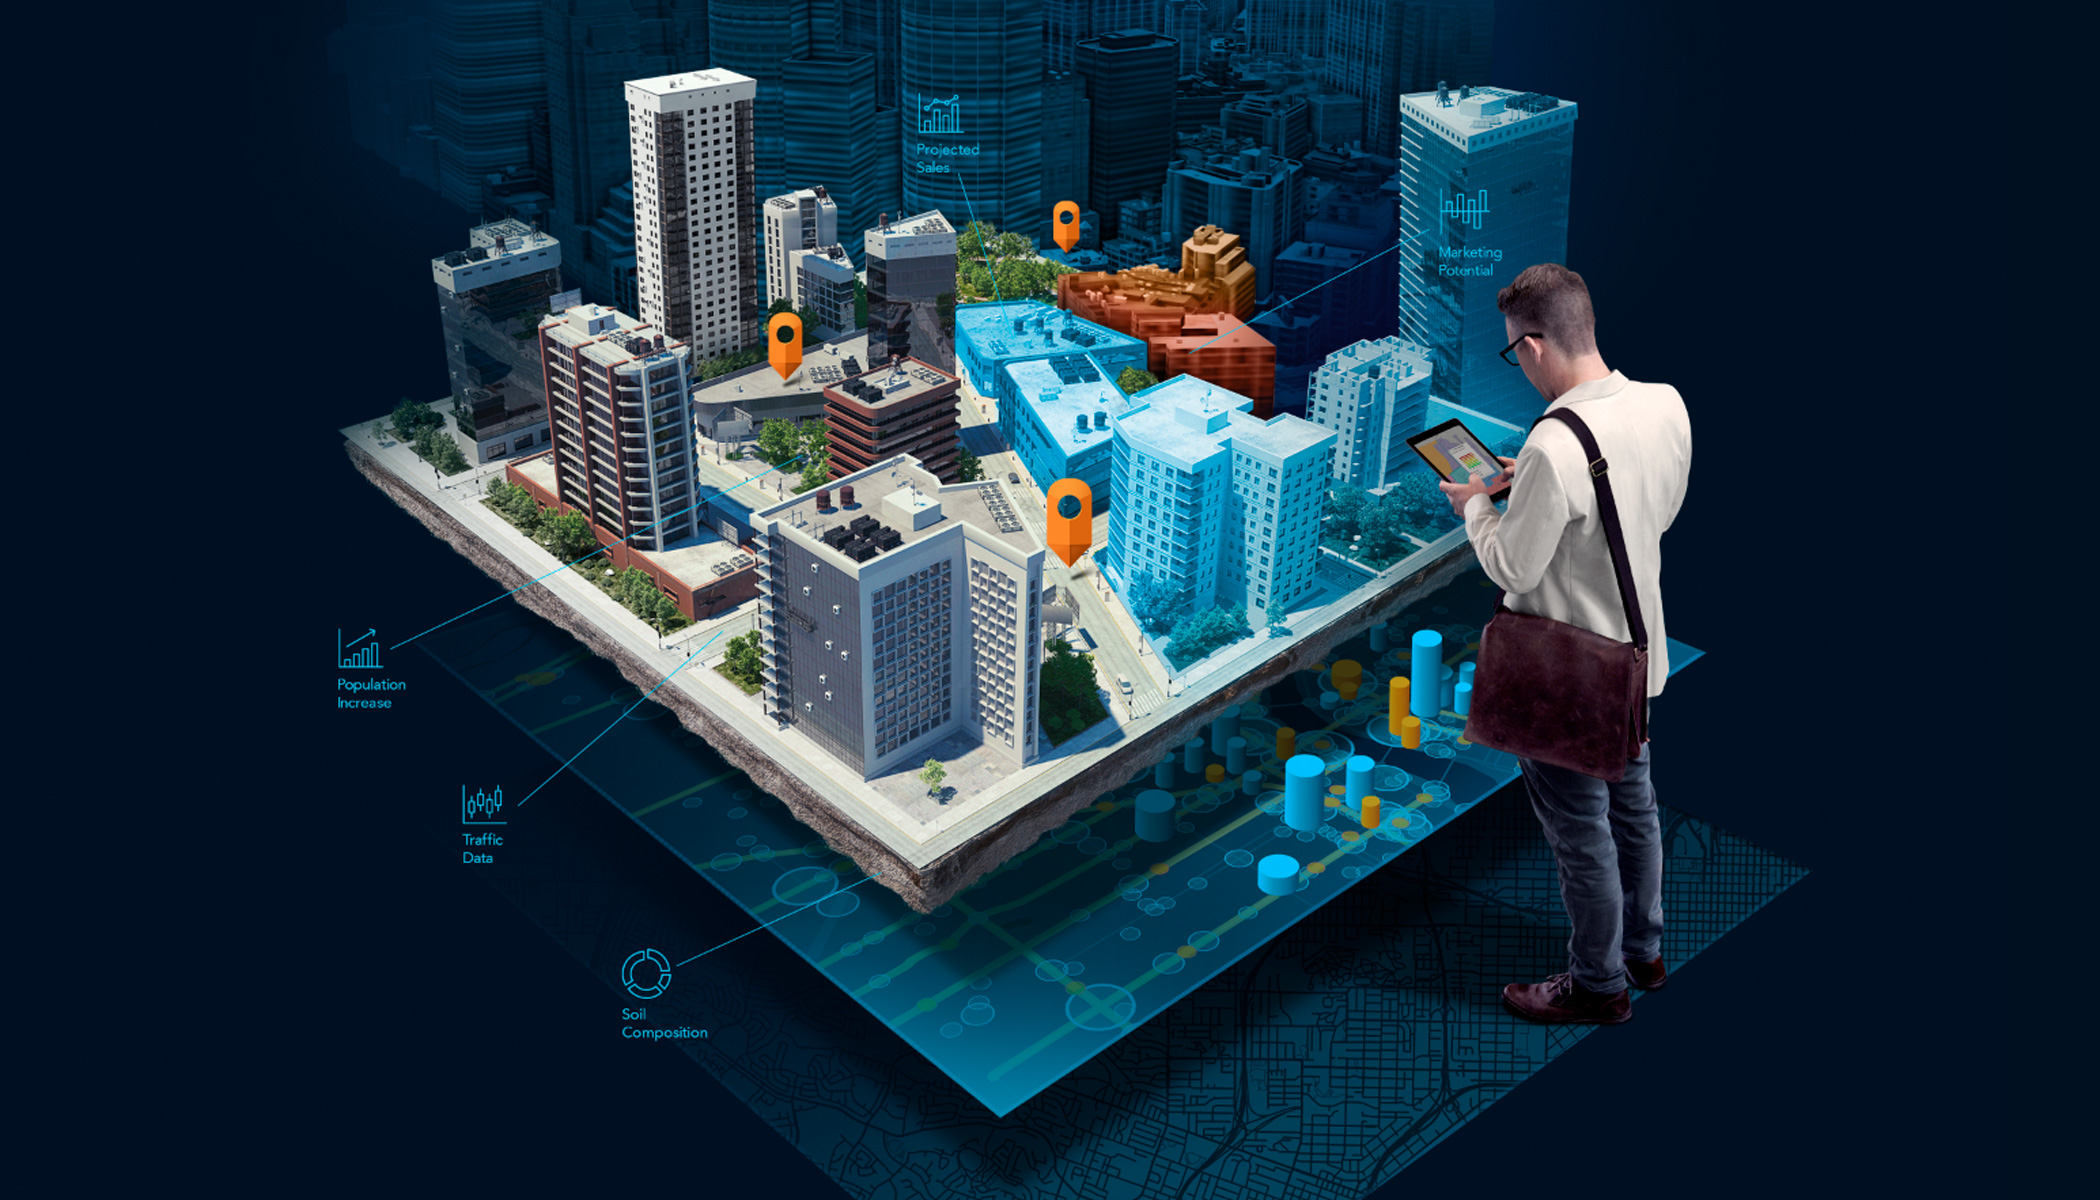 A 3D digital twin of a city with tall buildings and a person using GIS technology on a tablet